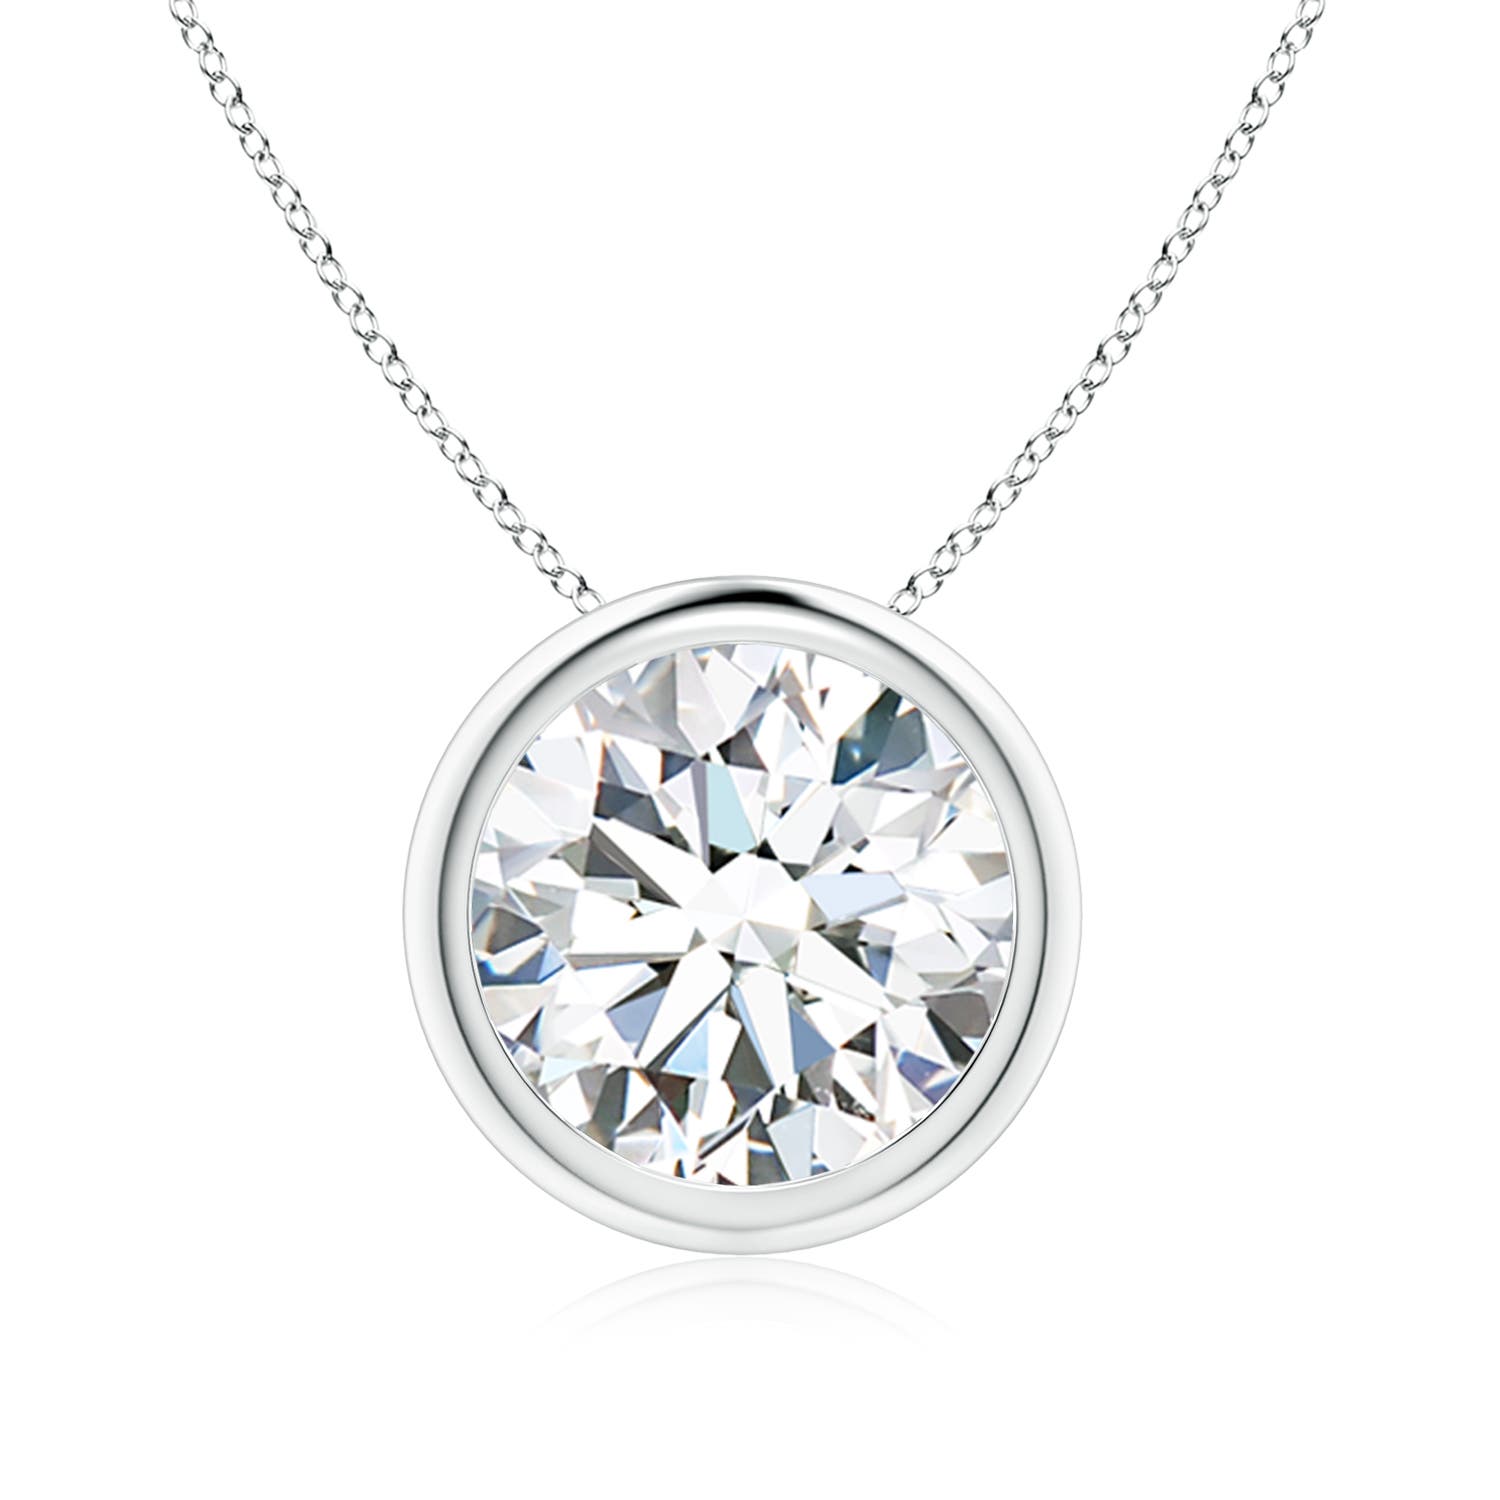 Shop White Gold Necklaces for Women | Angara